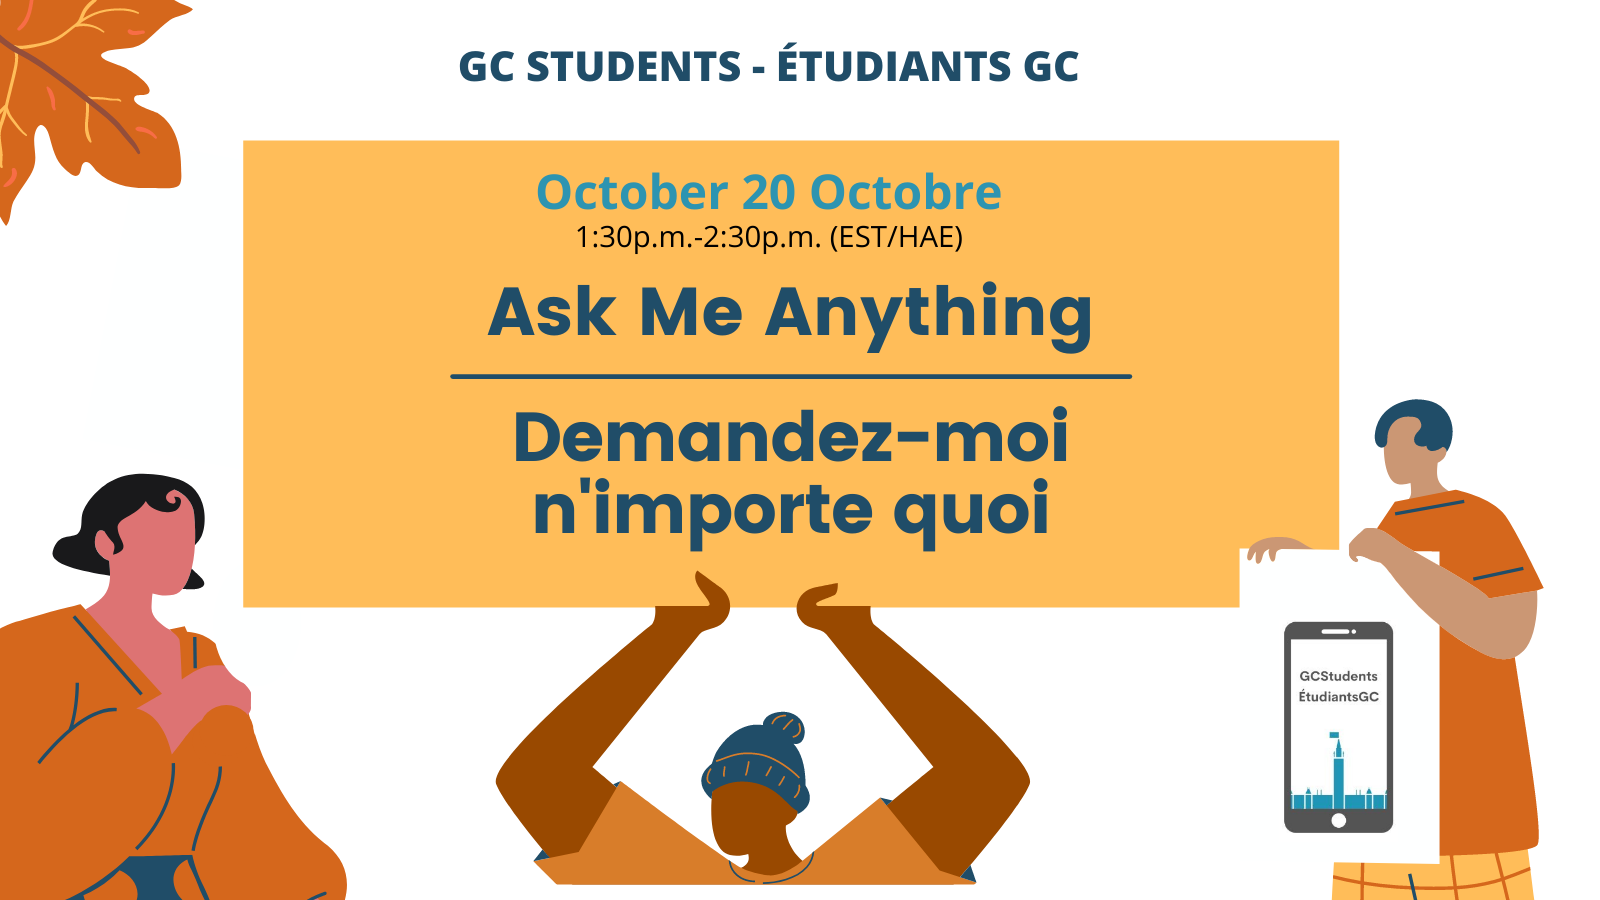 Ask Me Anything image for October session